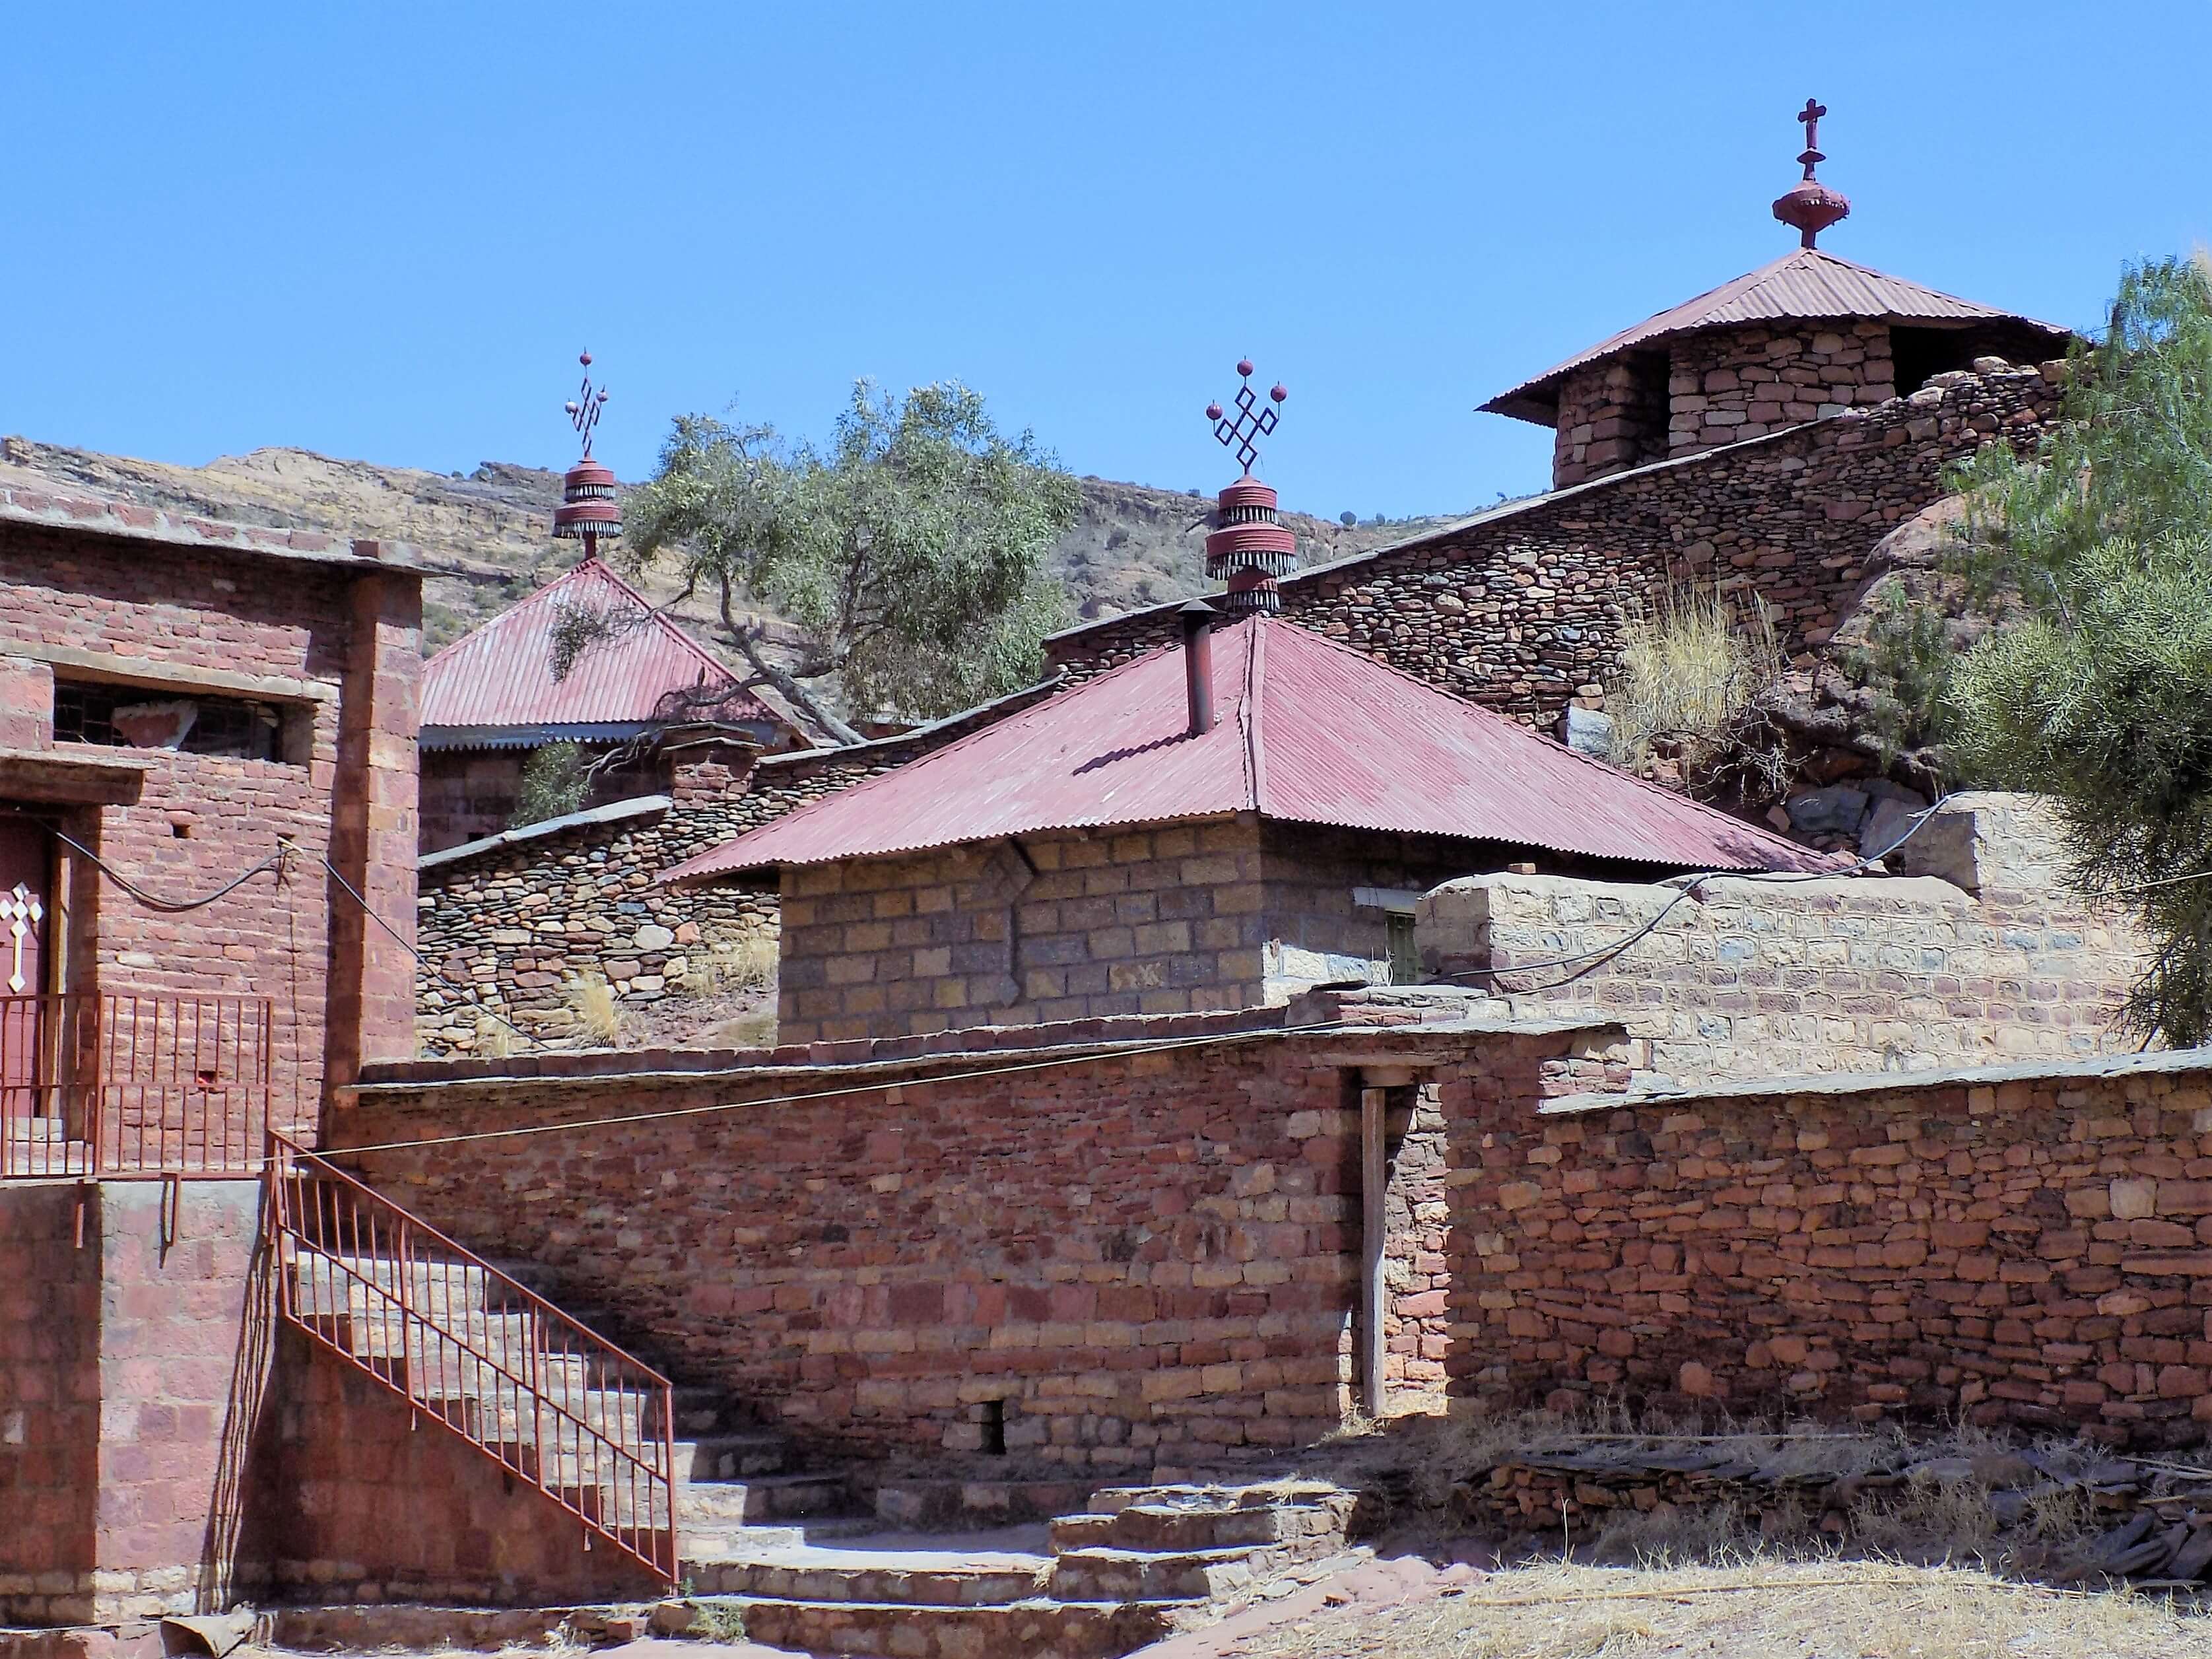 This photo shows the collection of buildings which makes up the Abraha We Atsbeha Church